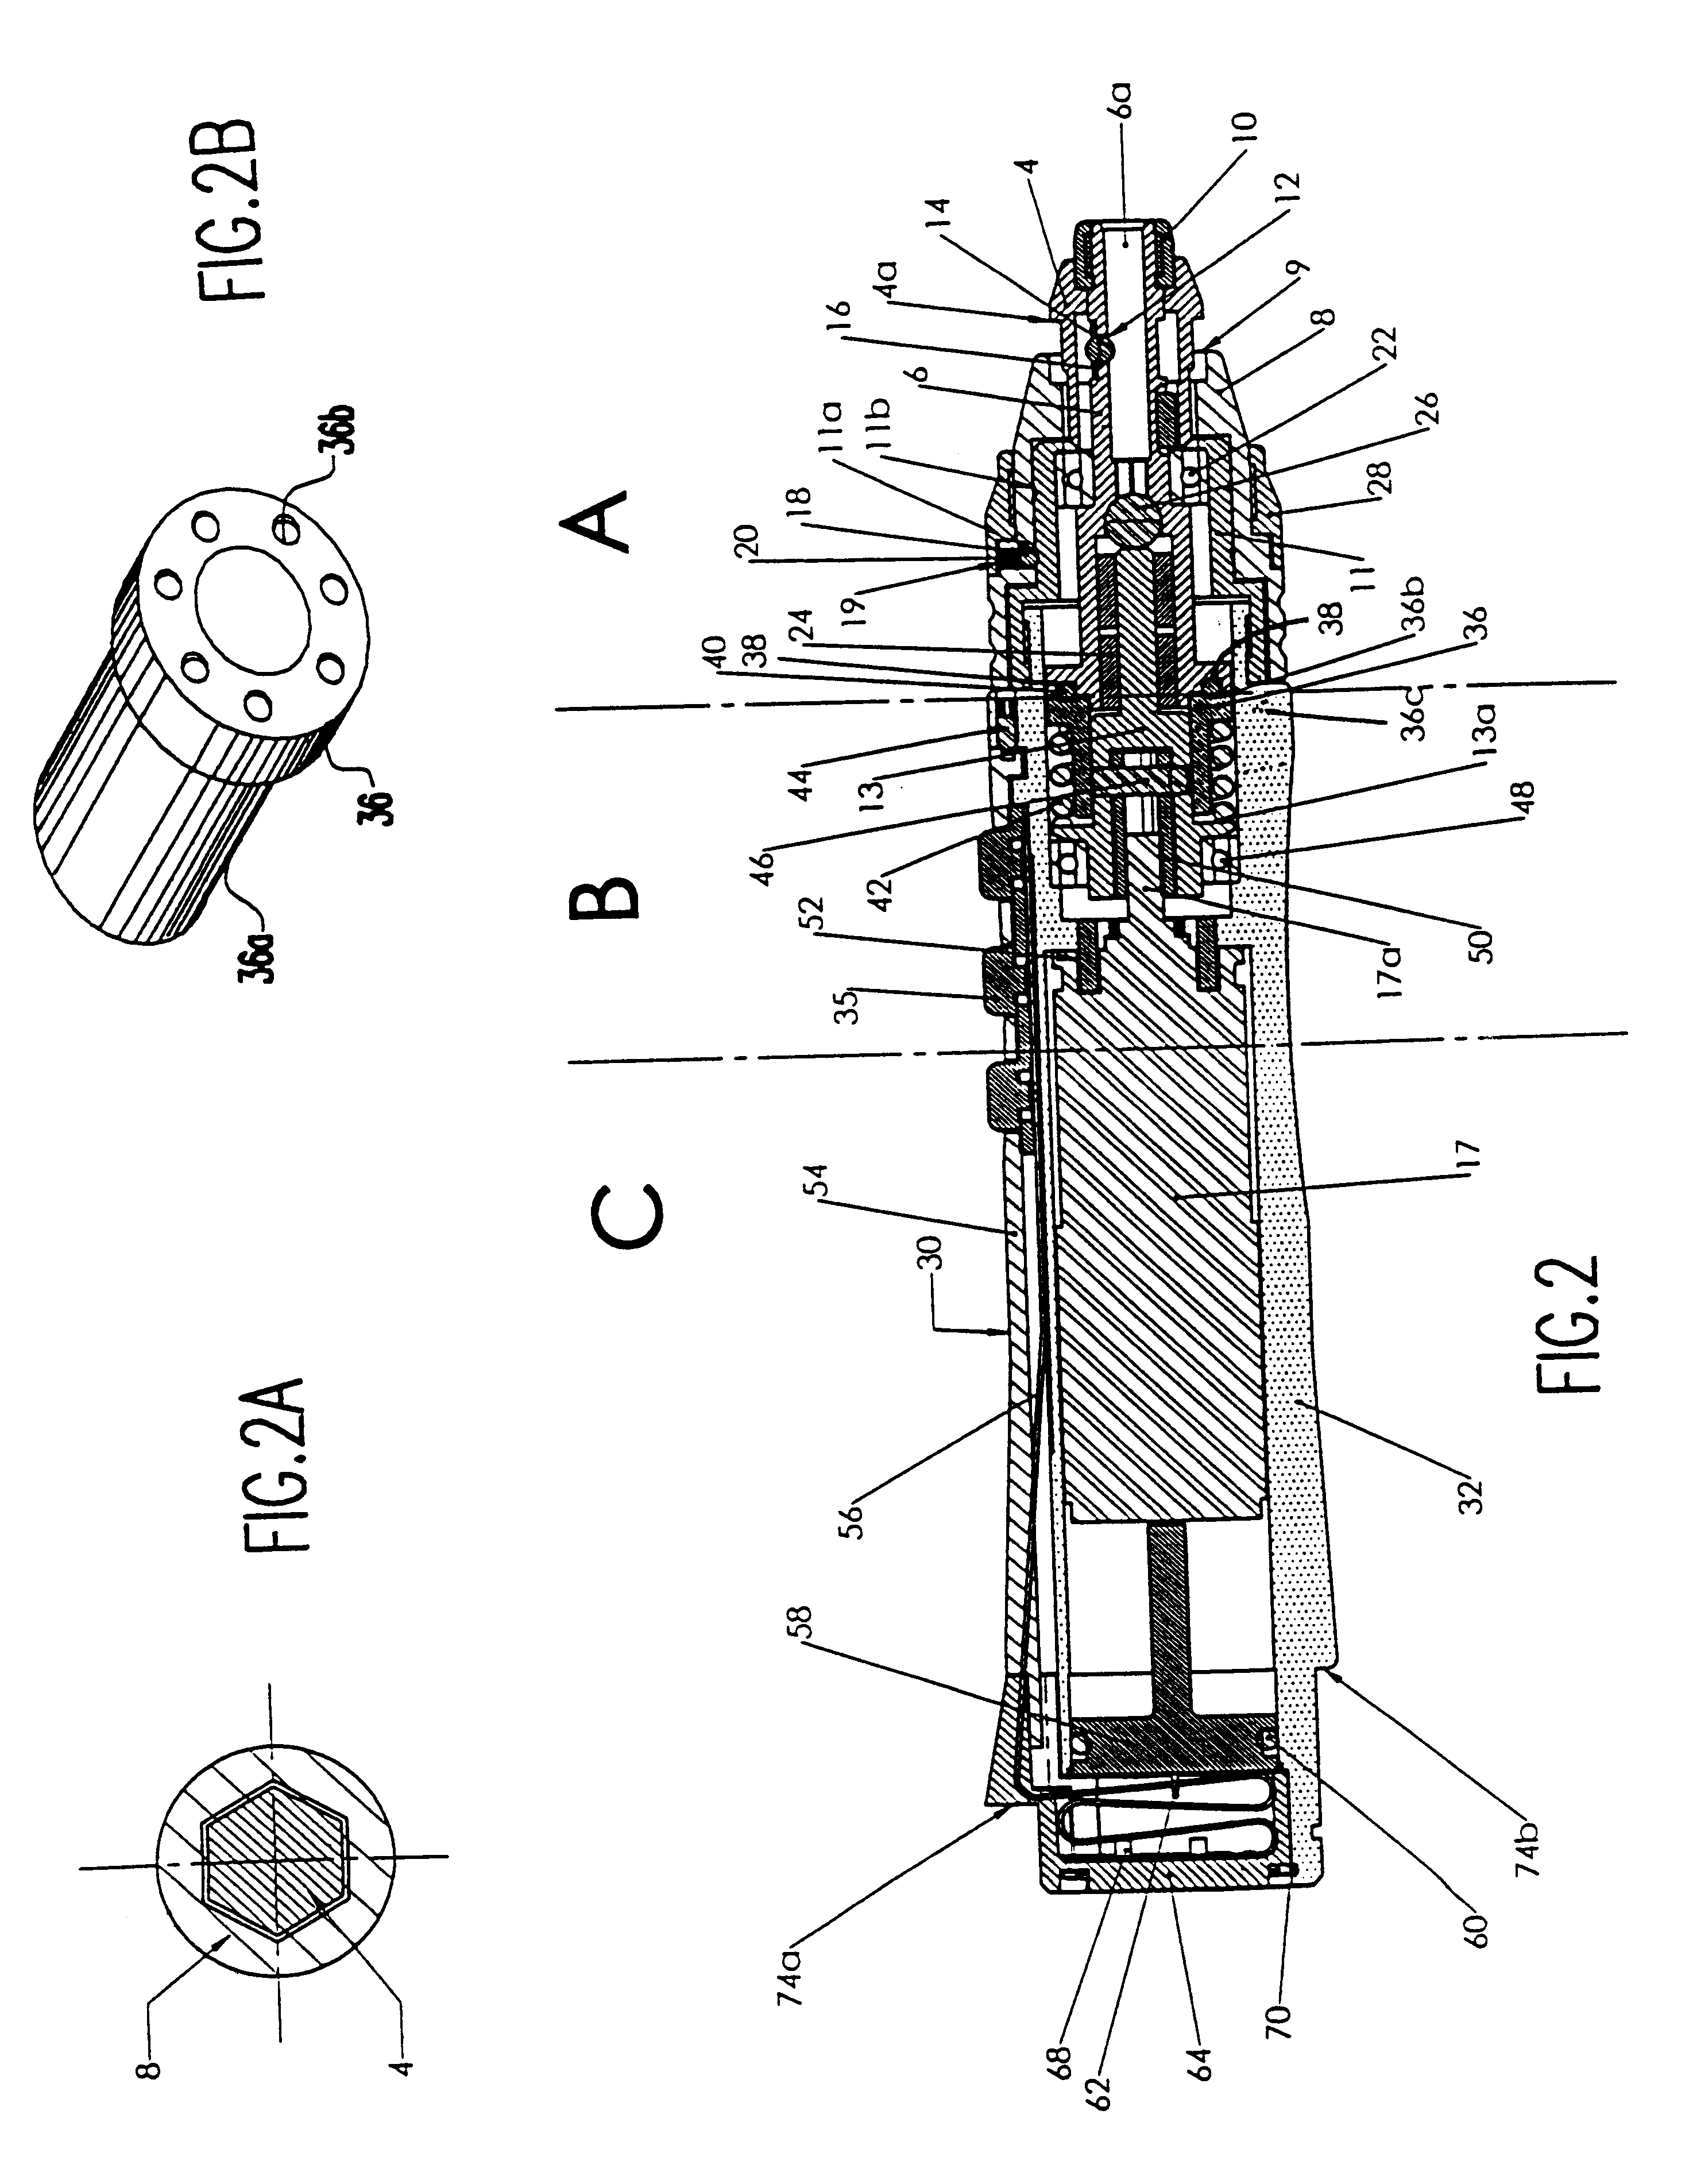 Powered surgical instrument having locking systems and a clutch mechanism